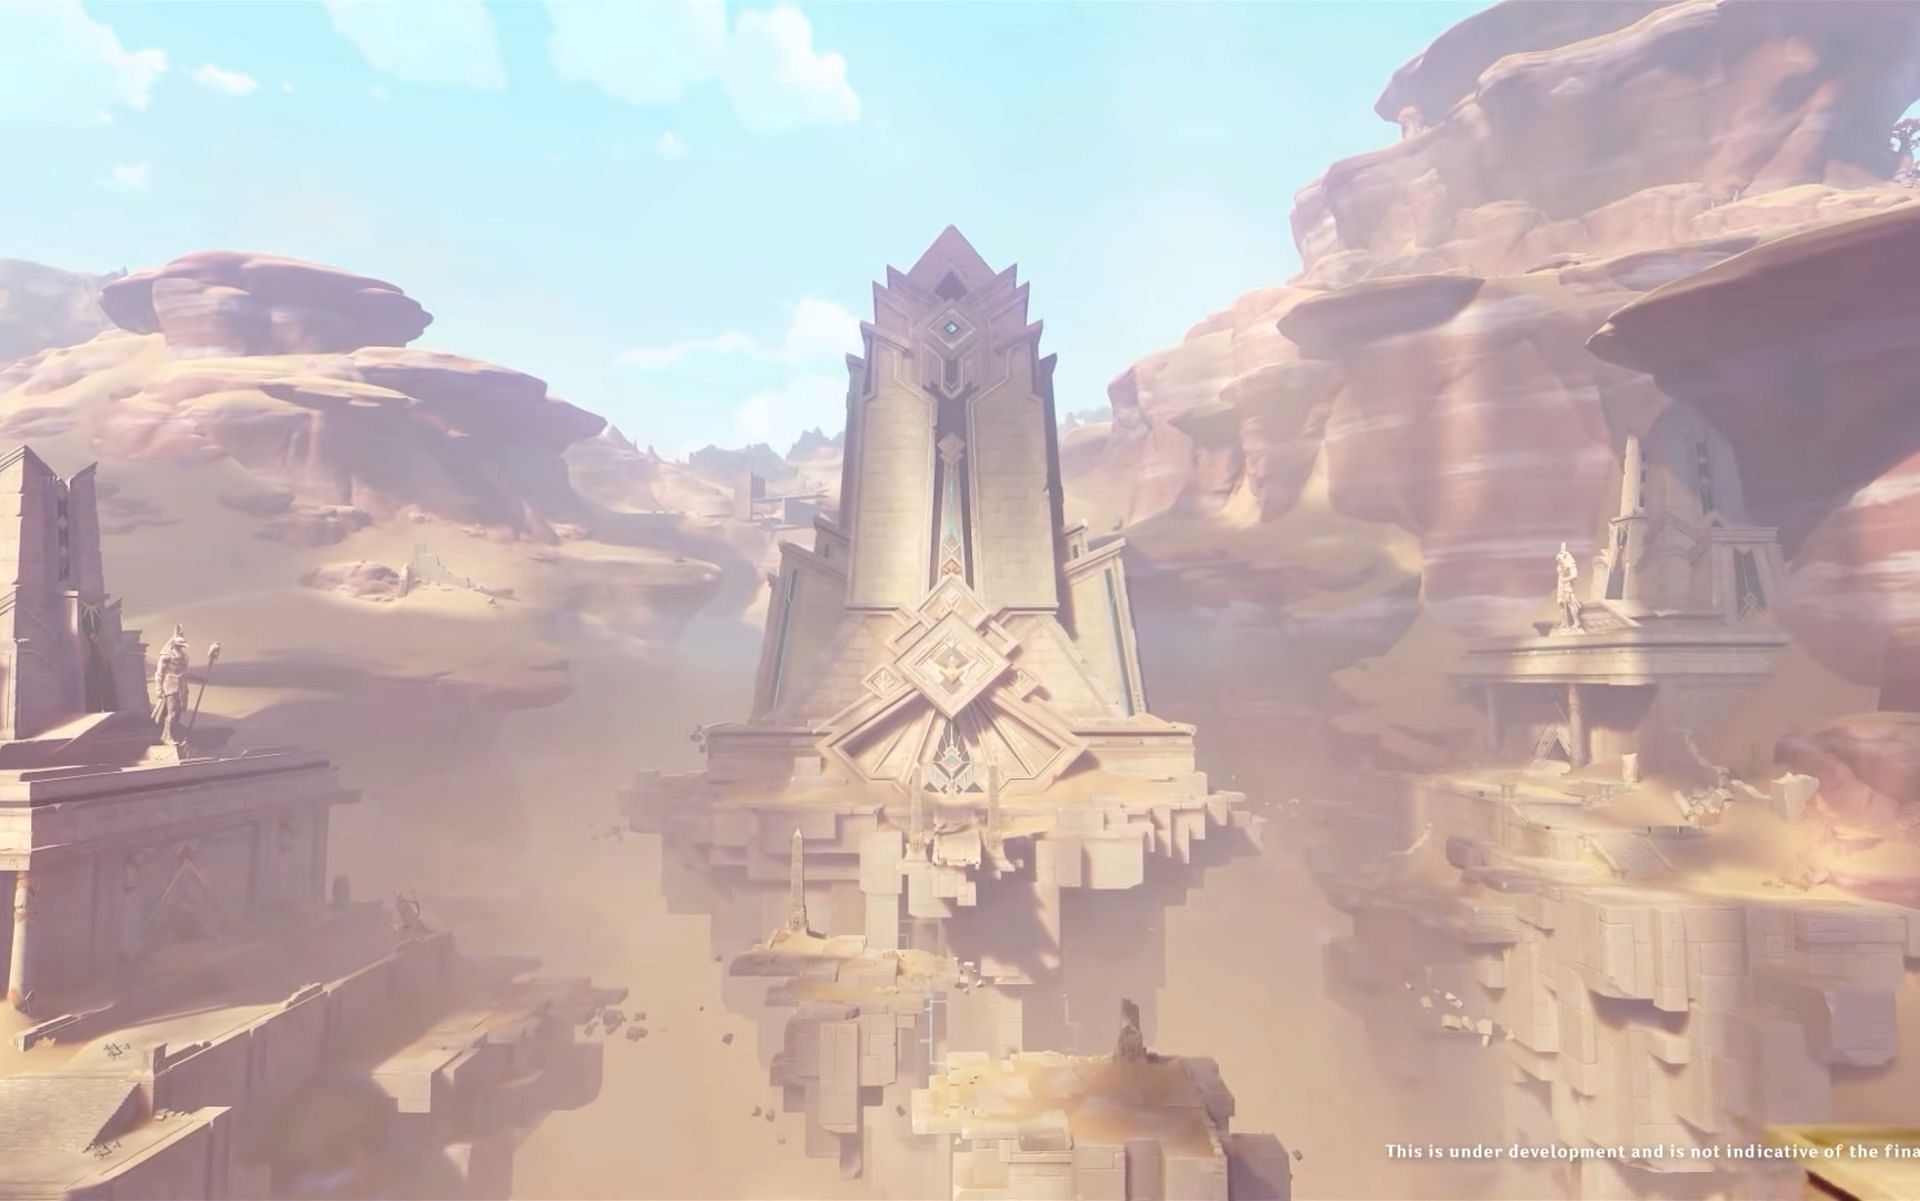 Genshin Impact provides a first look into the vast deserts of Sumeru in the latest teaser (Image via HoYoverse)